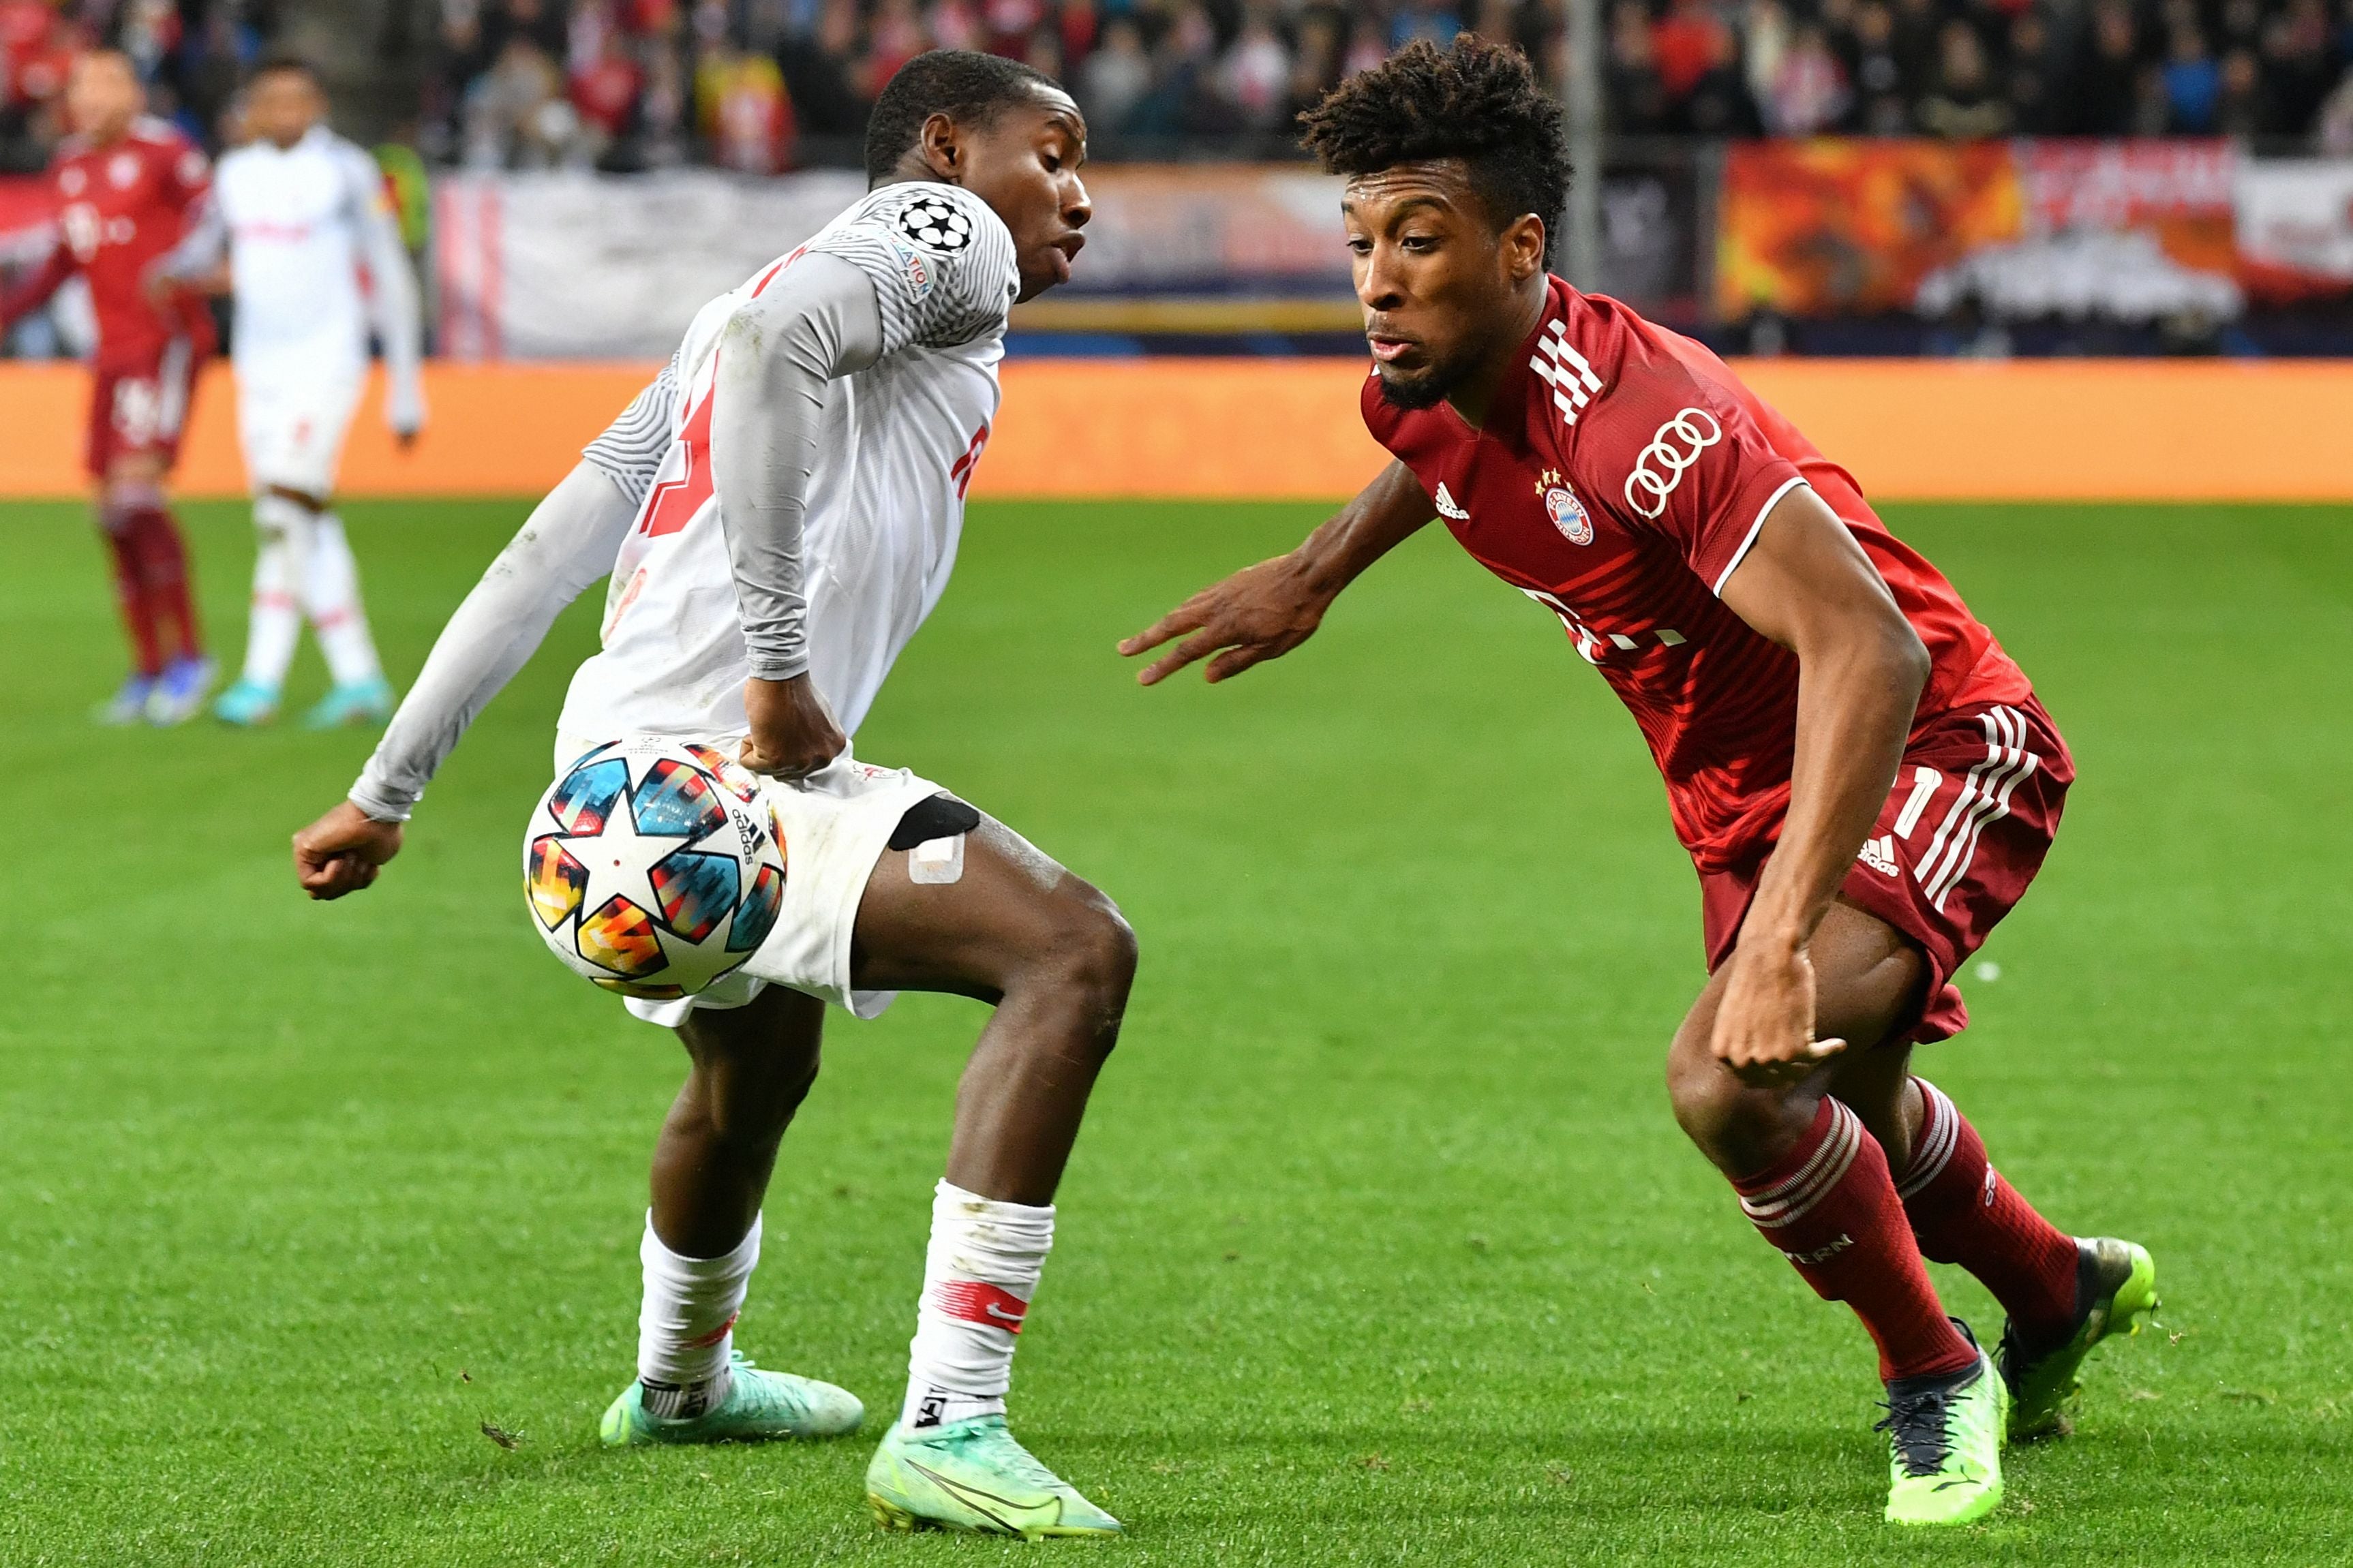 Bayern Munich and RB Salzburg will square off with a place in the Champions League quarter-finals on the line